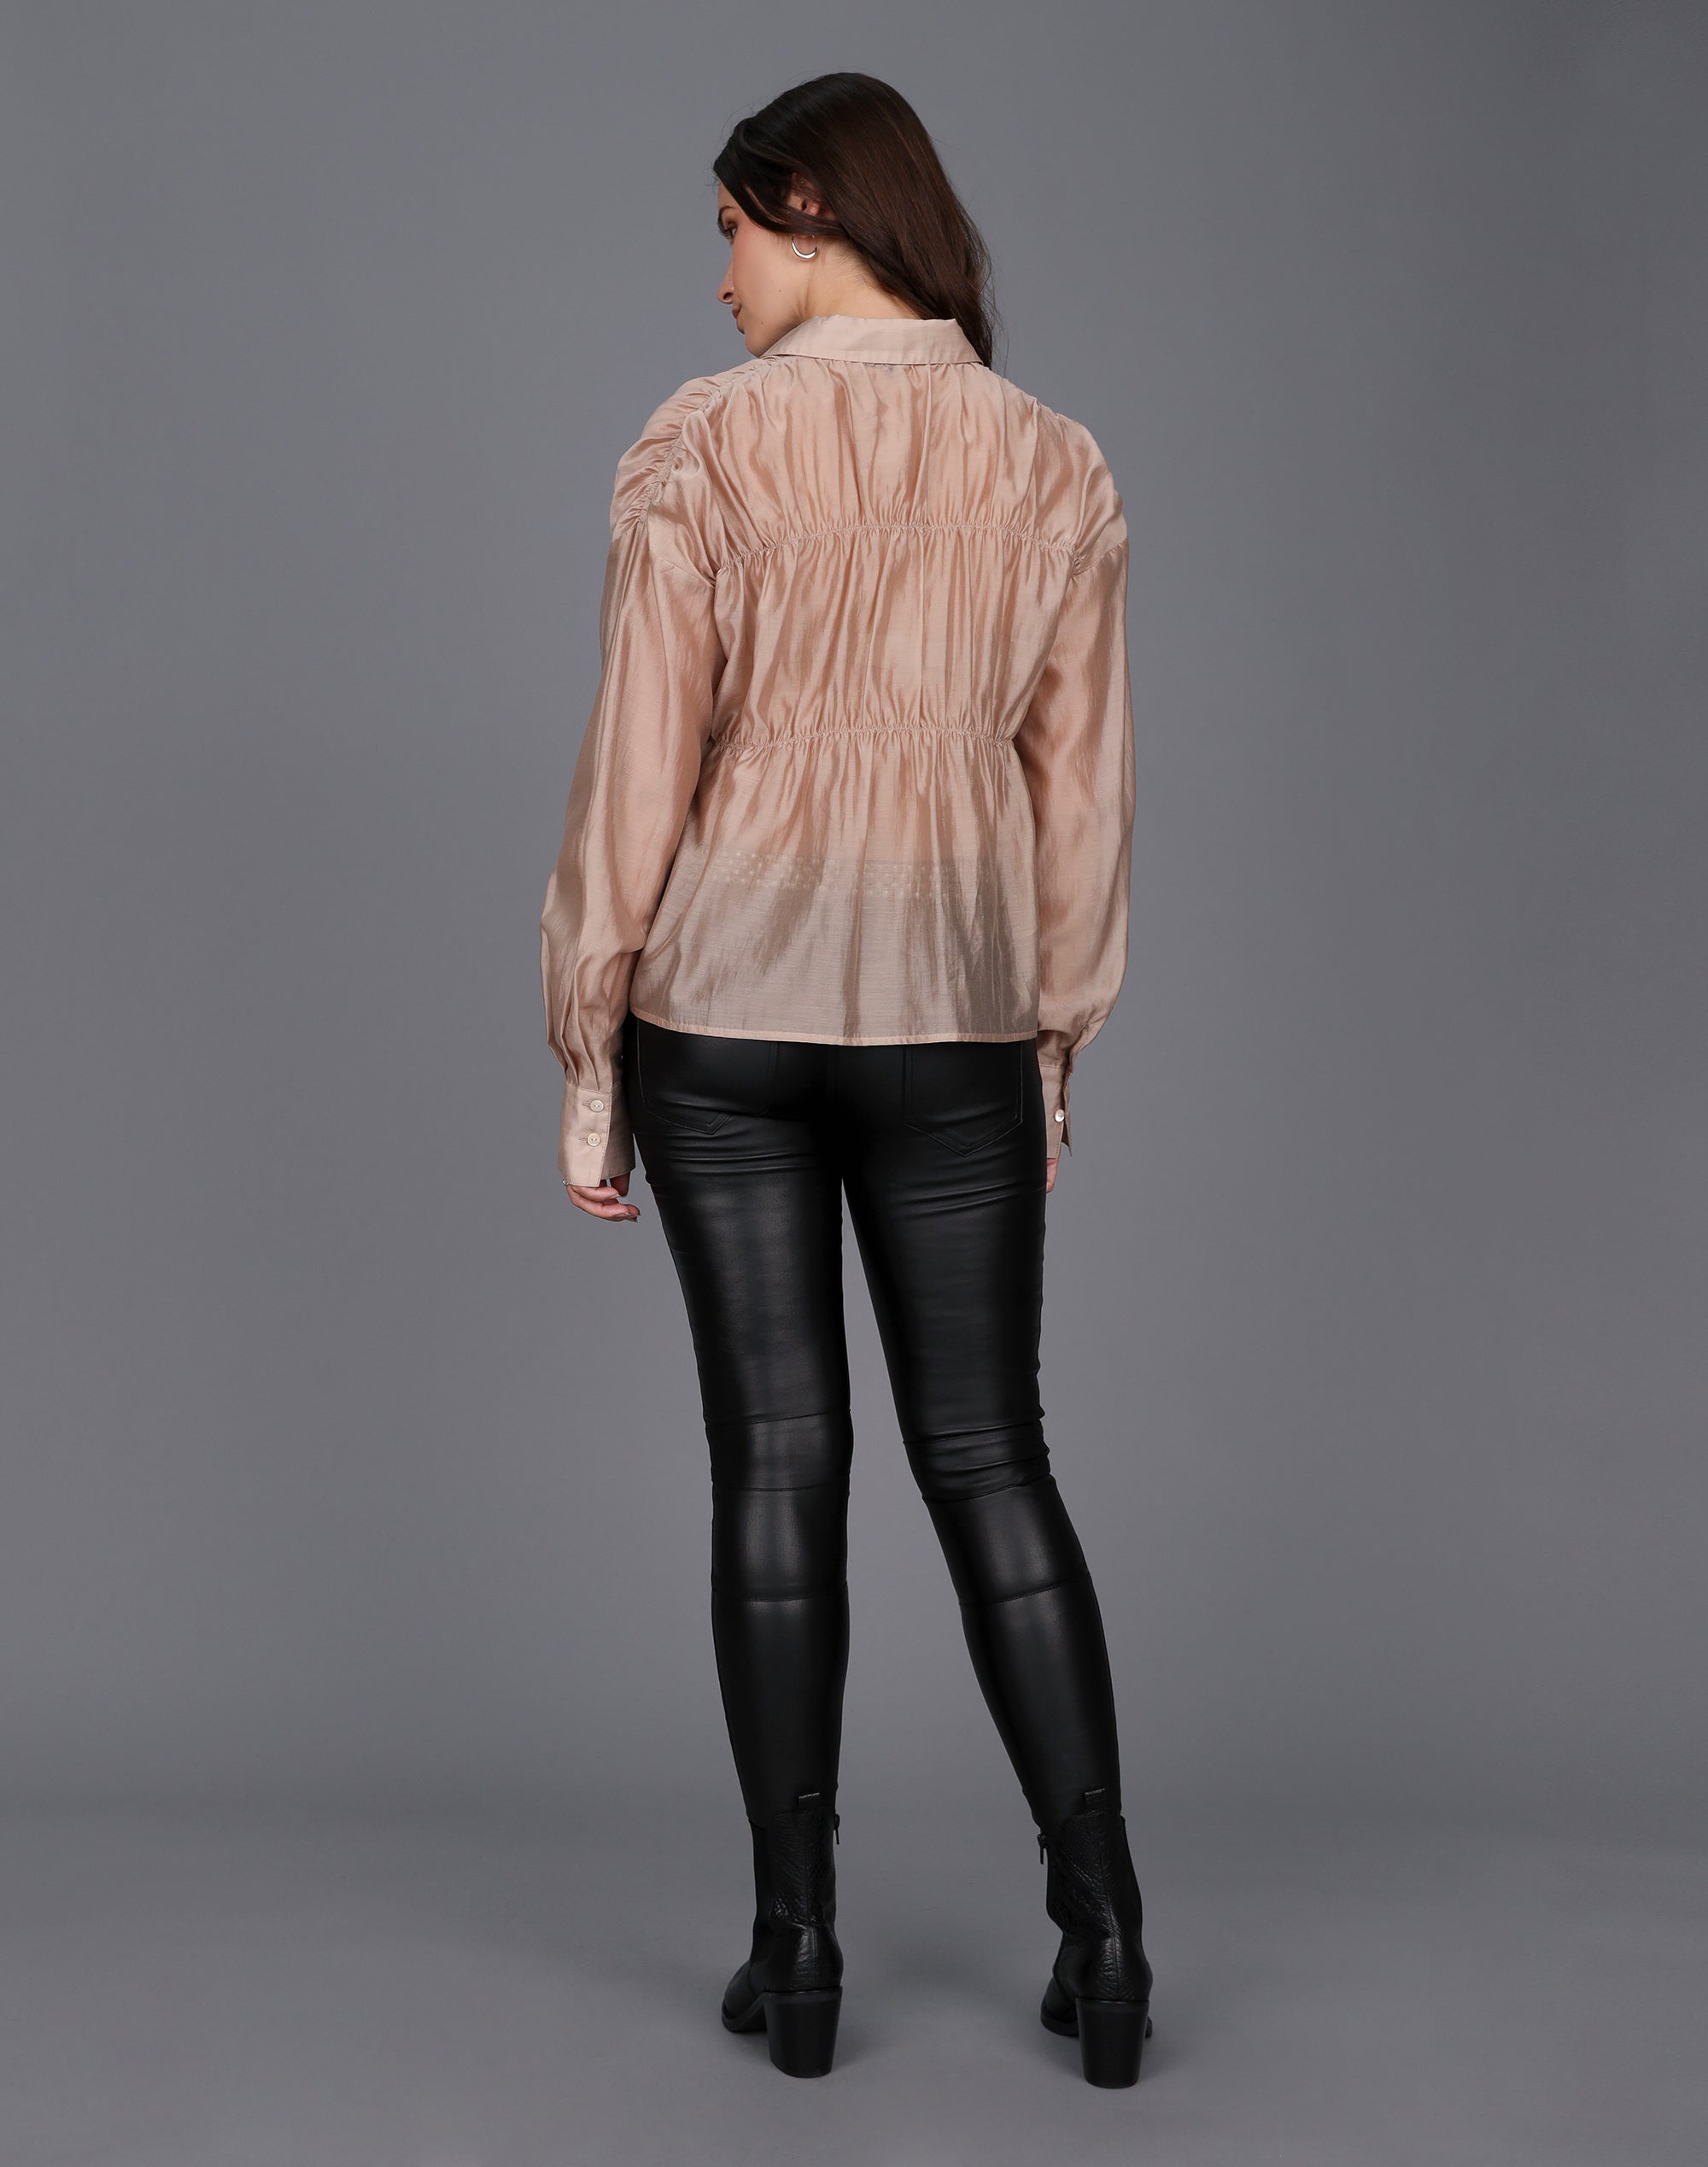 Ruched Body Shirt